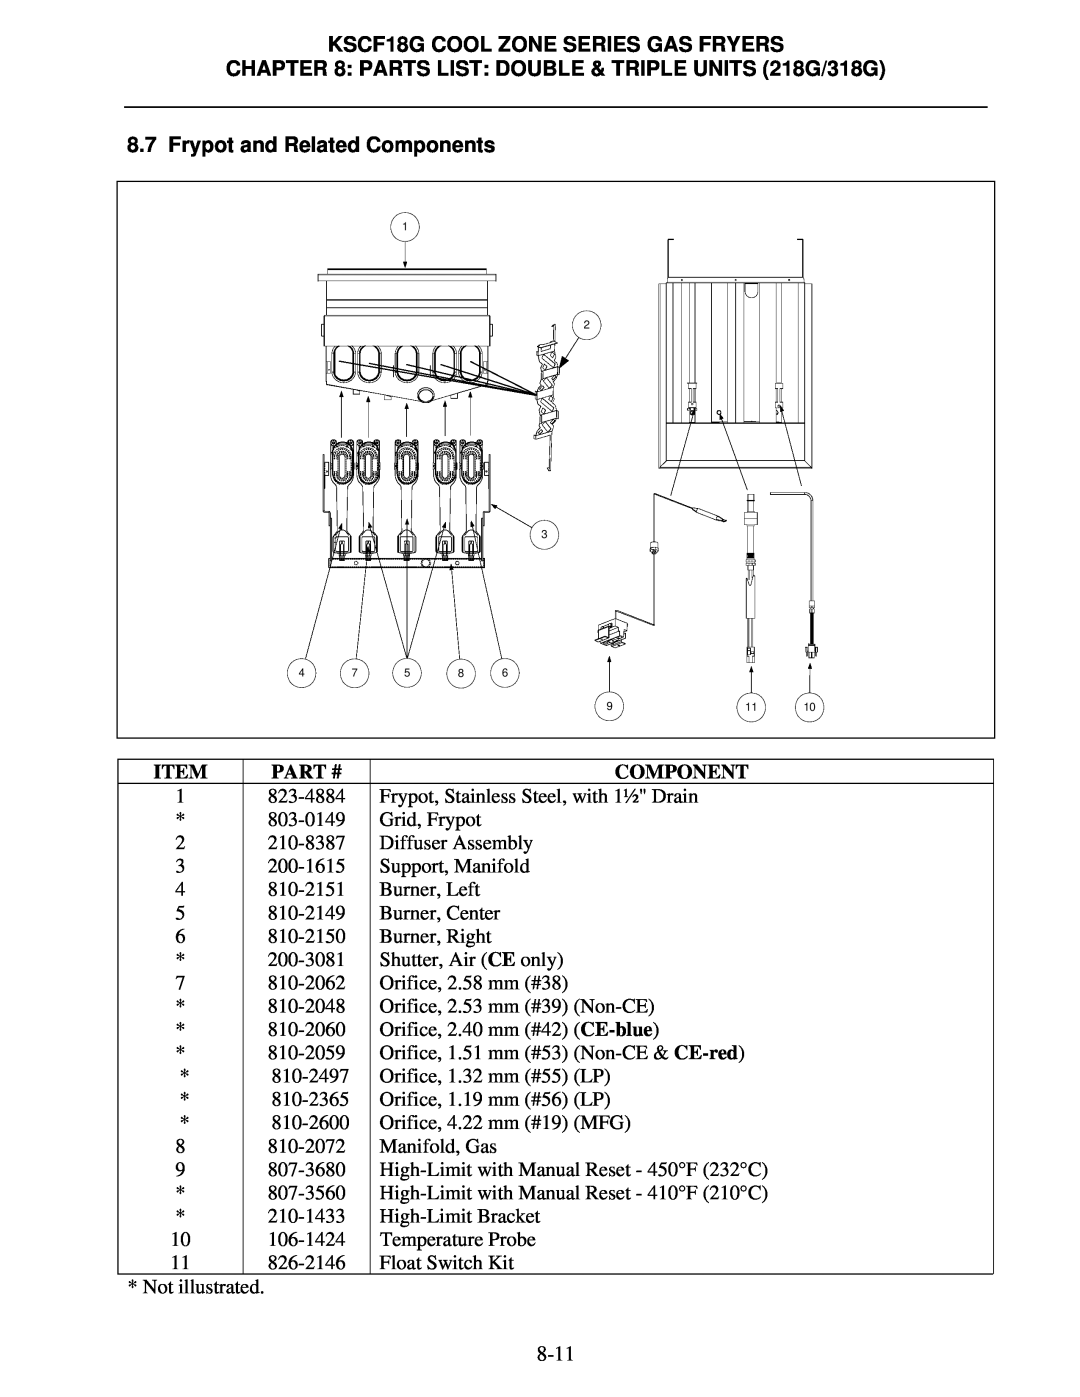 Frymaster manual Frypot and Related Components, KSCF18G COOL ZONE SERIES GAS FRYERS, Item, Part #, 823-4884 